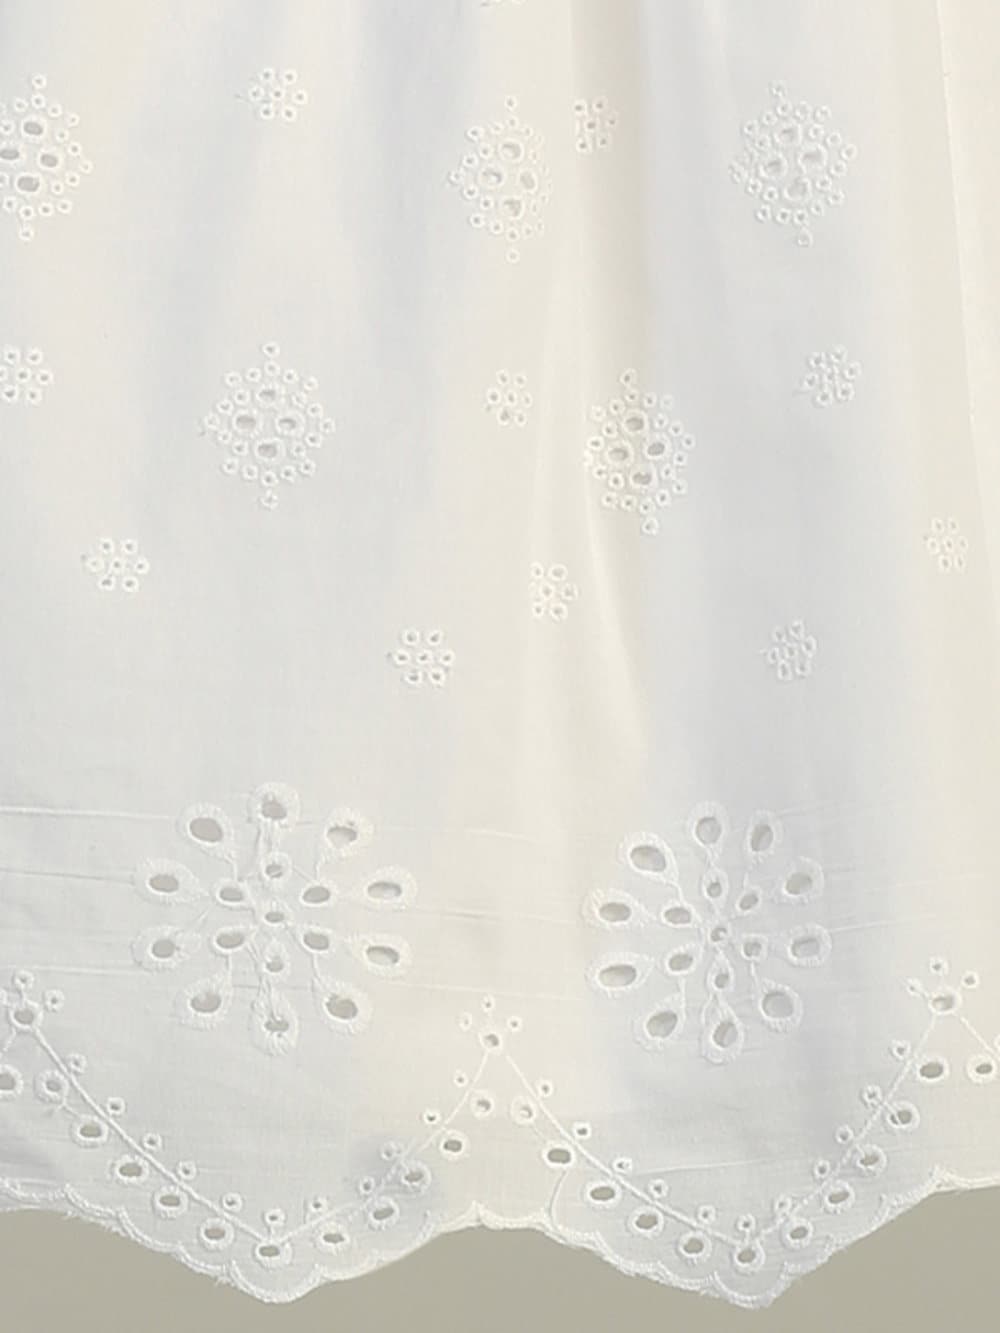 Close-up view of the cotton eyelet fabric, showcasing the delicate eyelet details.